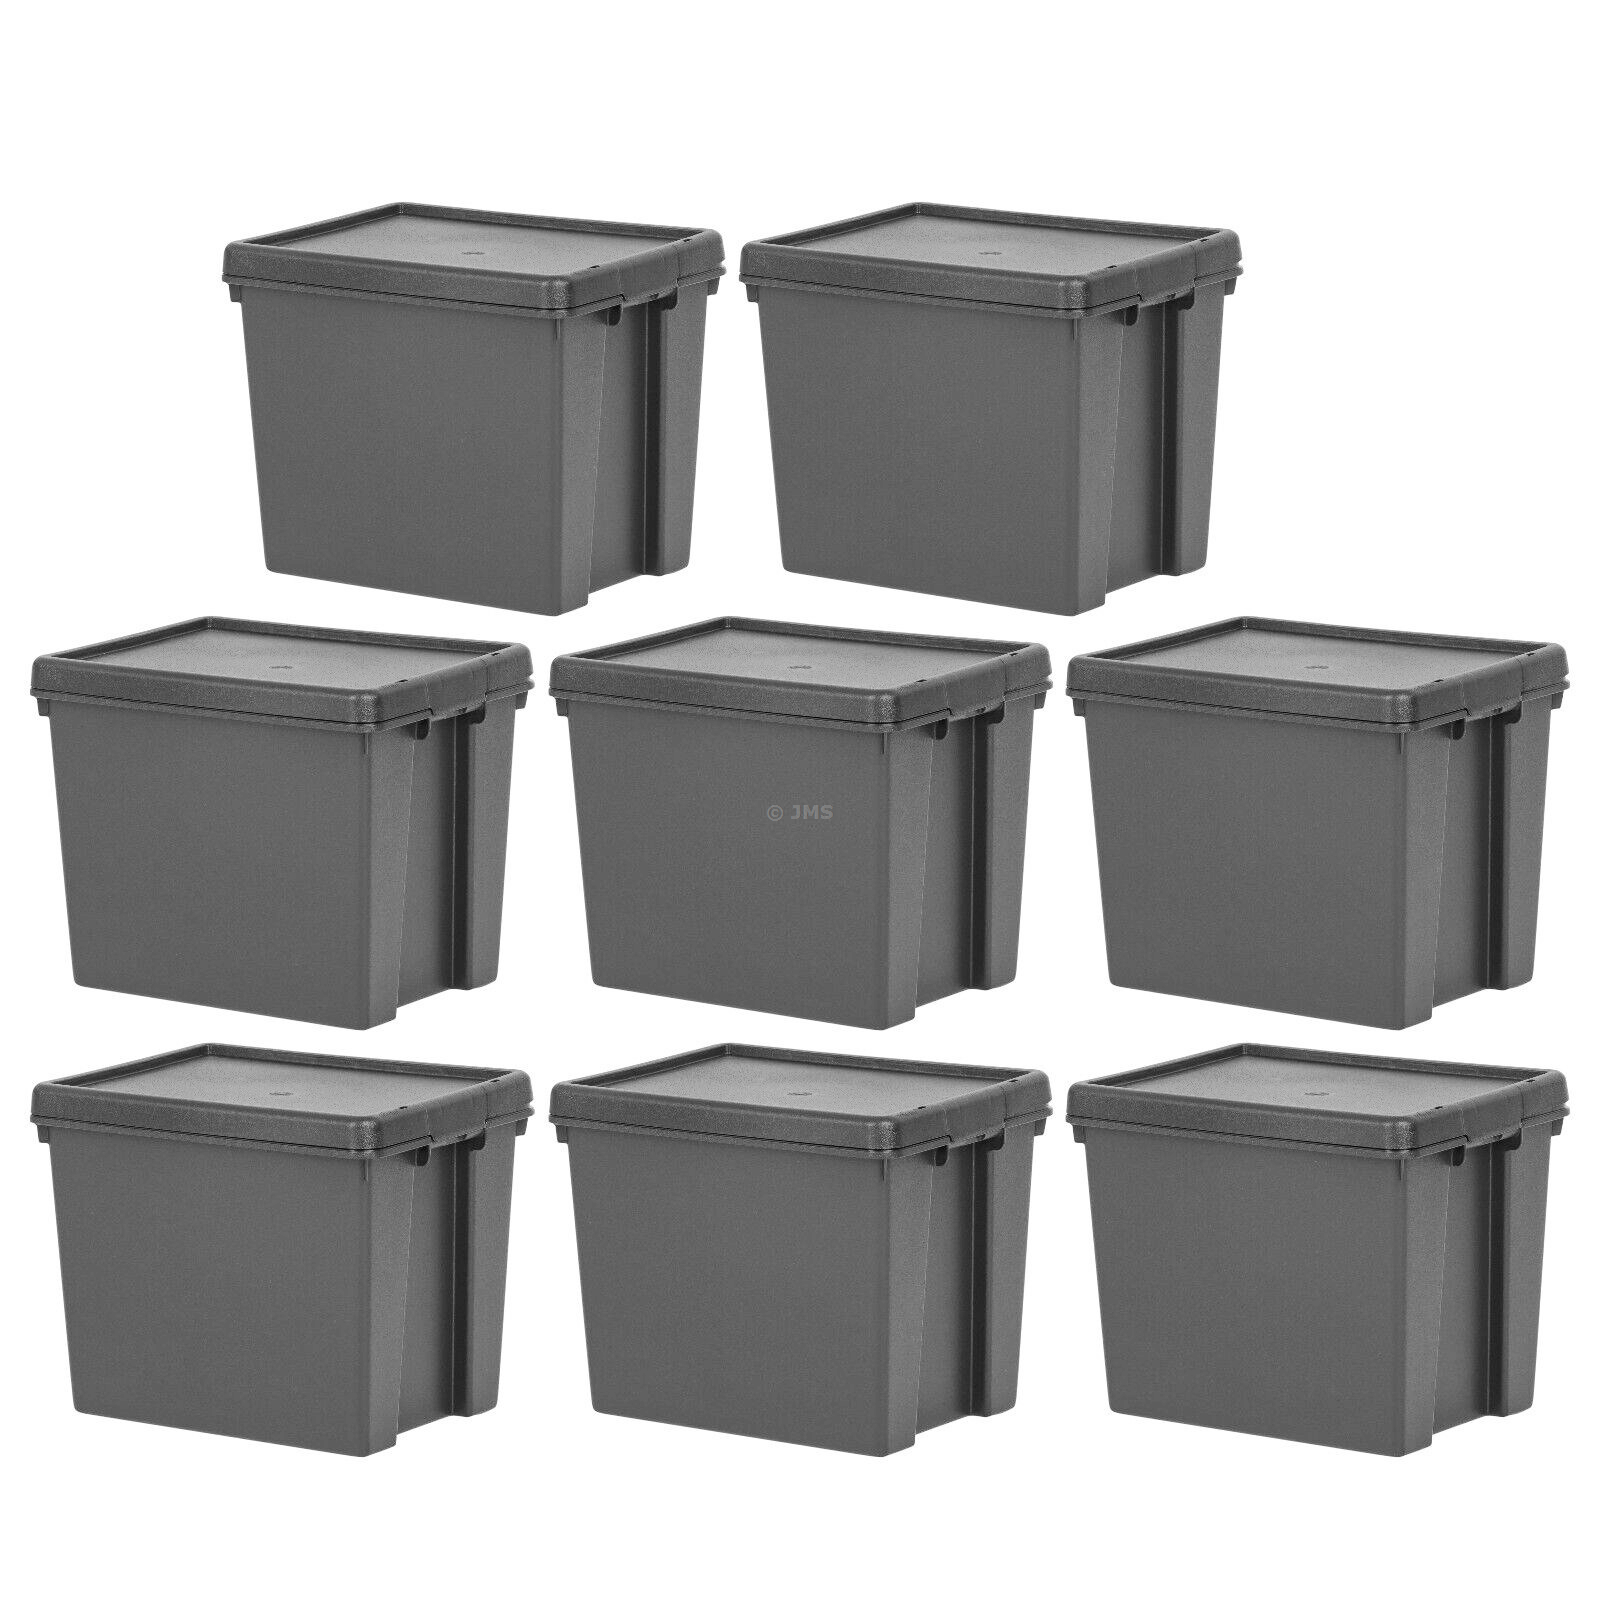 [Set of 8] Heavy Duty 24L Black Stackable Storage Box with Lid Nestable Containers Recycled Plastic Home Office Garage